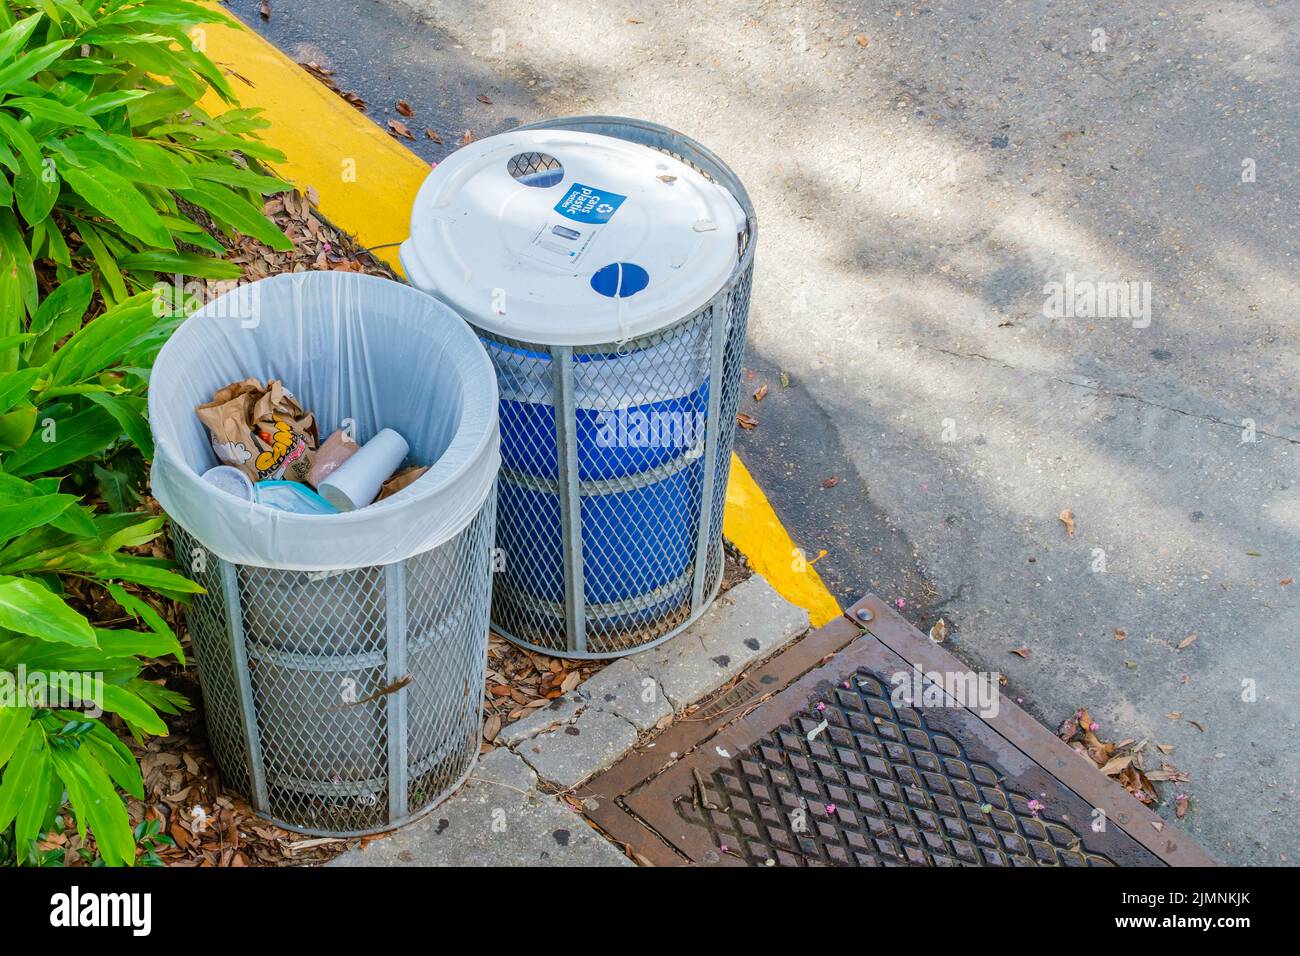 https://c8.alamy.com/comp/2JMNKJK/new-orleans-la-usa-august-5-2022-trash-can-next-to-recycling-can-on-tulane-university-campus-2JMNKJK.jpg